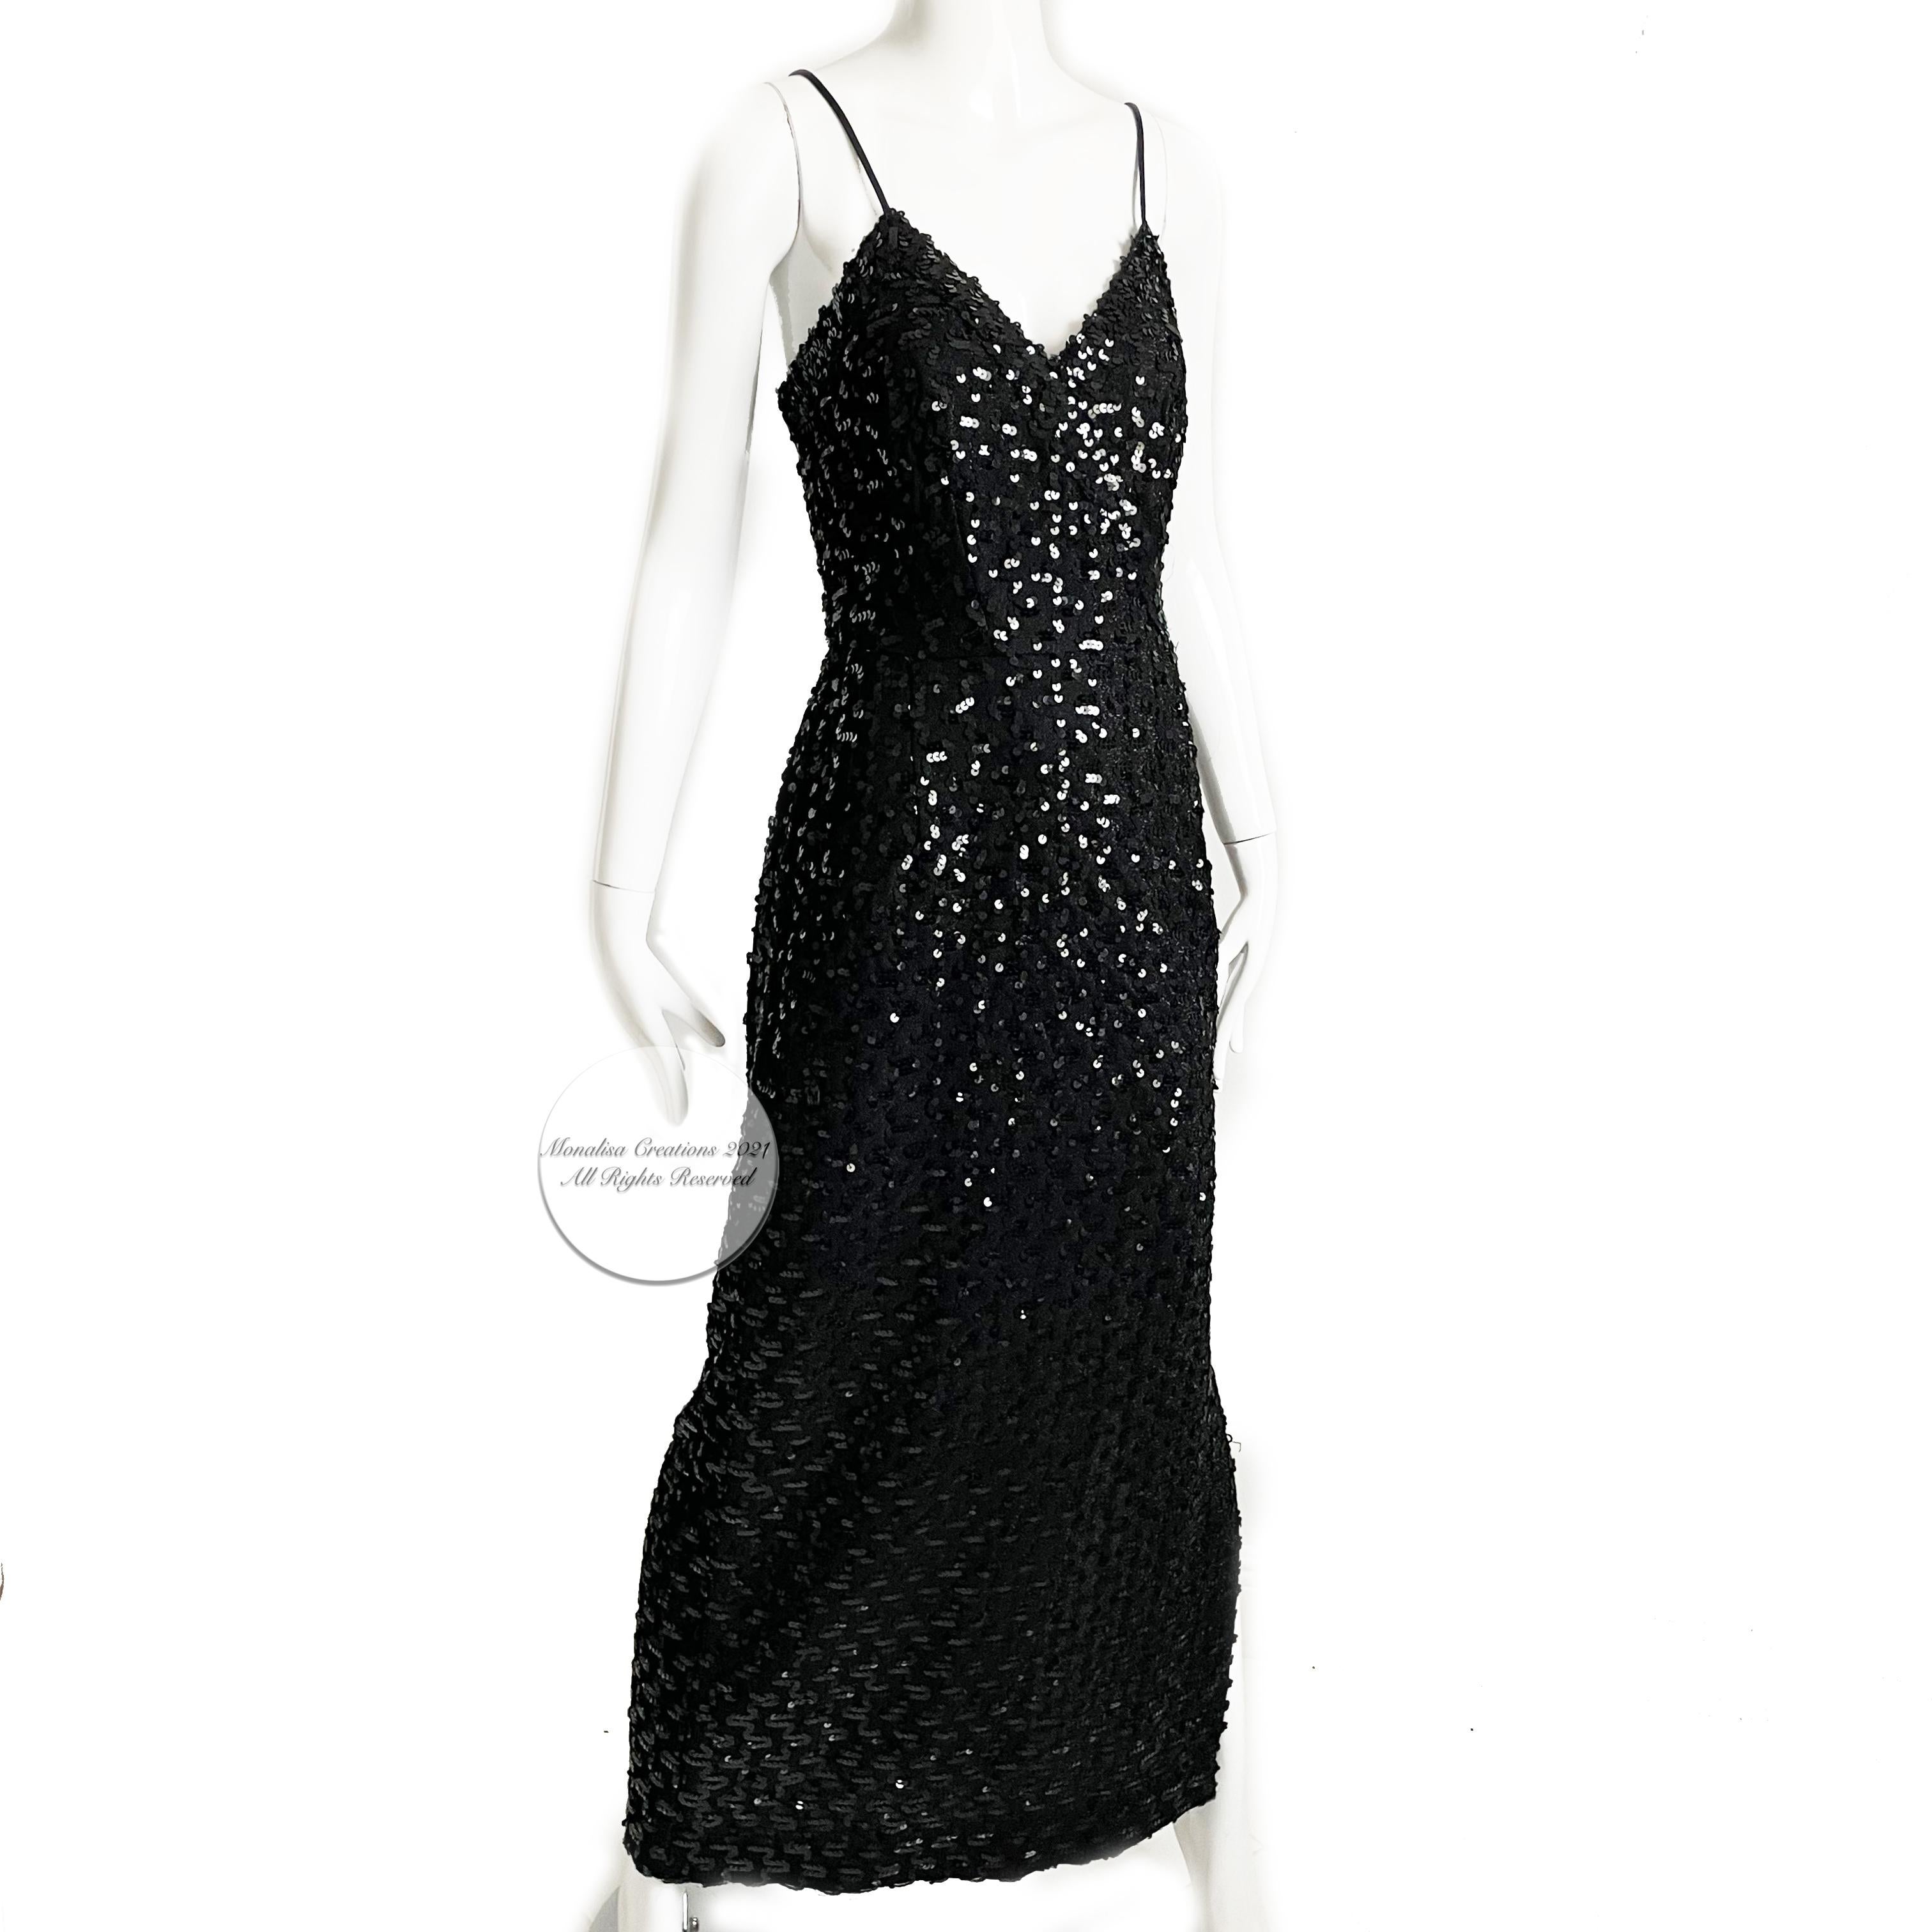 Sparkle alert! Here's a simple yet sexy evening gown by Lilli Diamond of California, likely made in the late 1970s. Made from a stretchy knit fabric with TONS of black sequins, this dress is cut to show off one's curves and features a side vent on